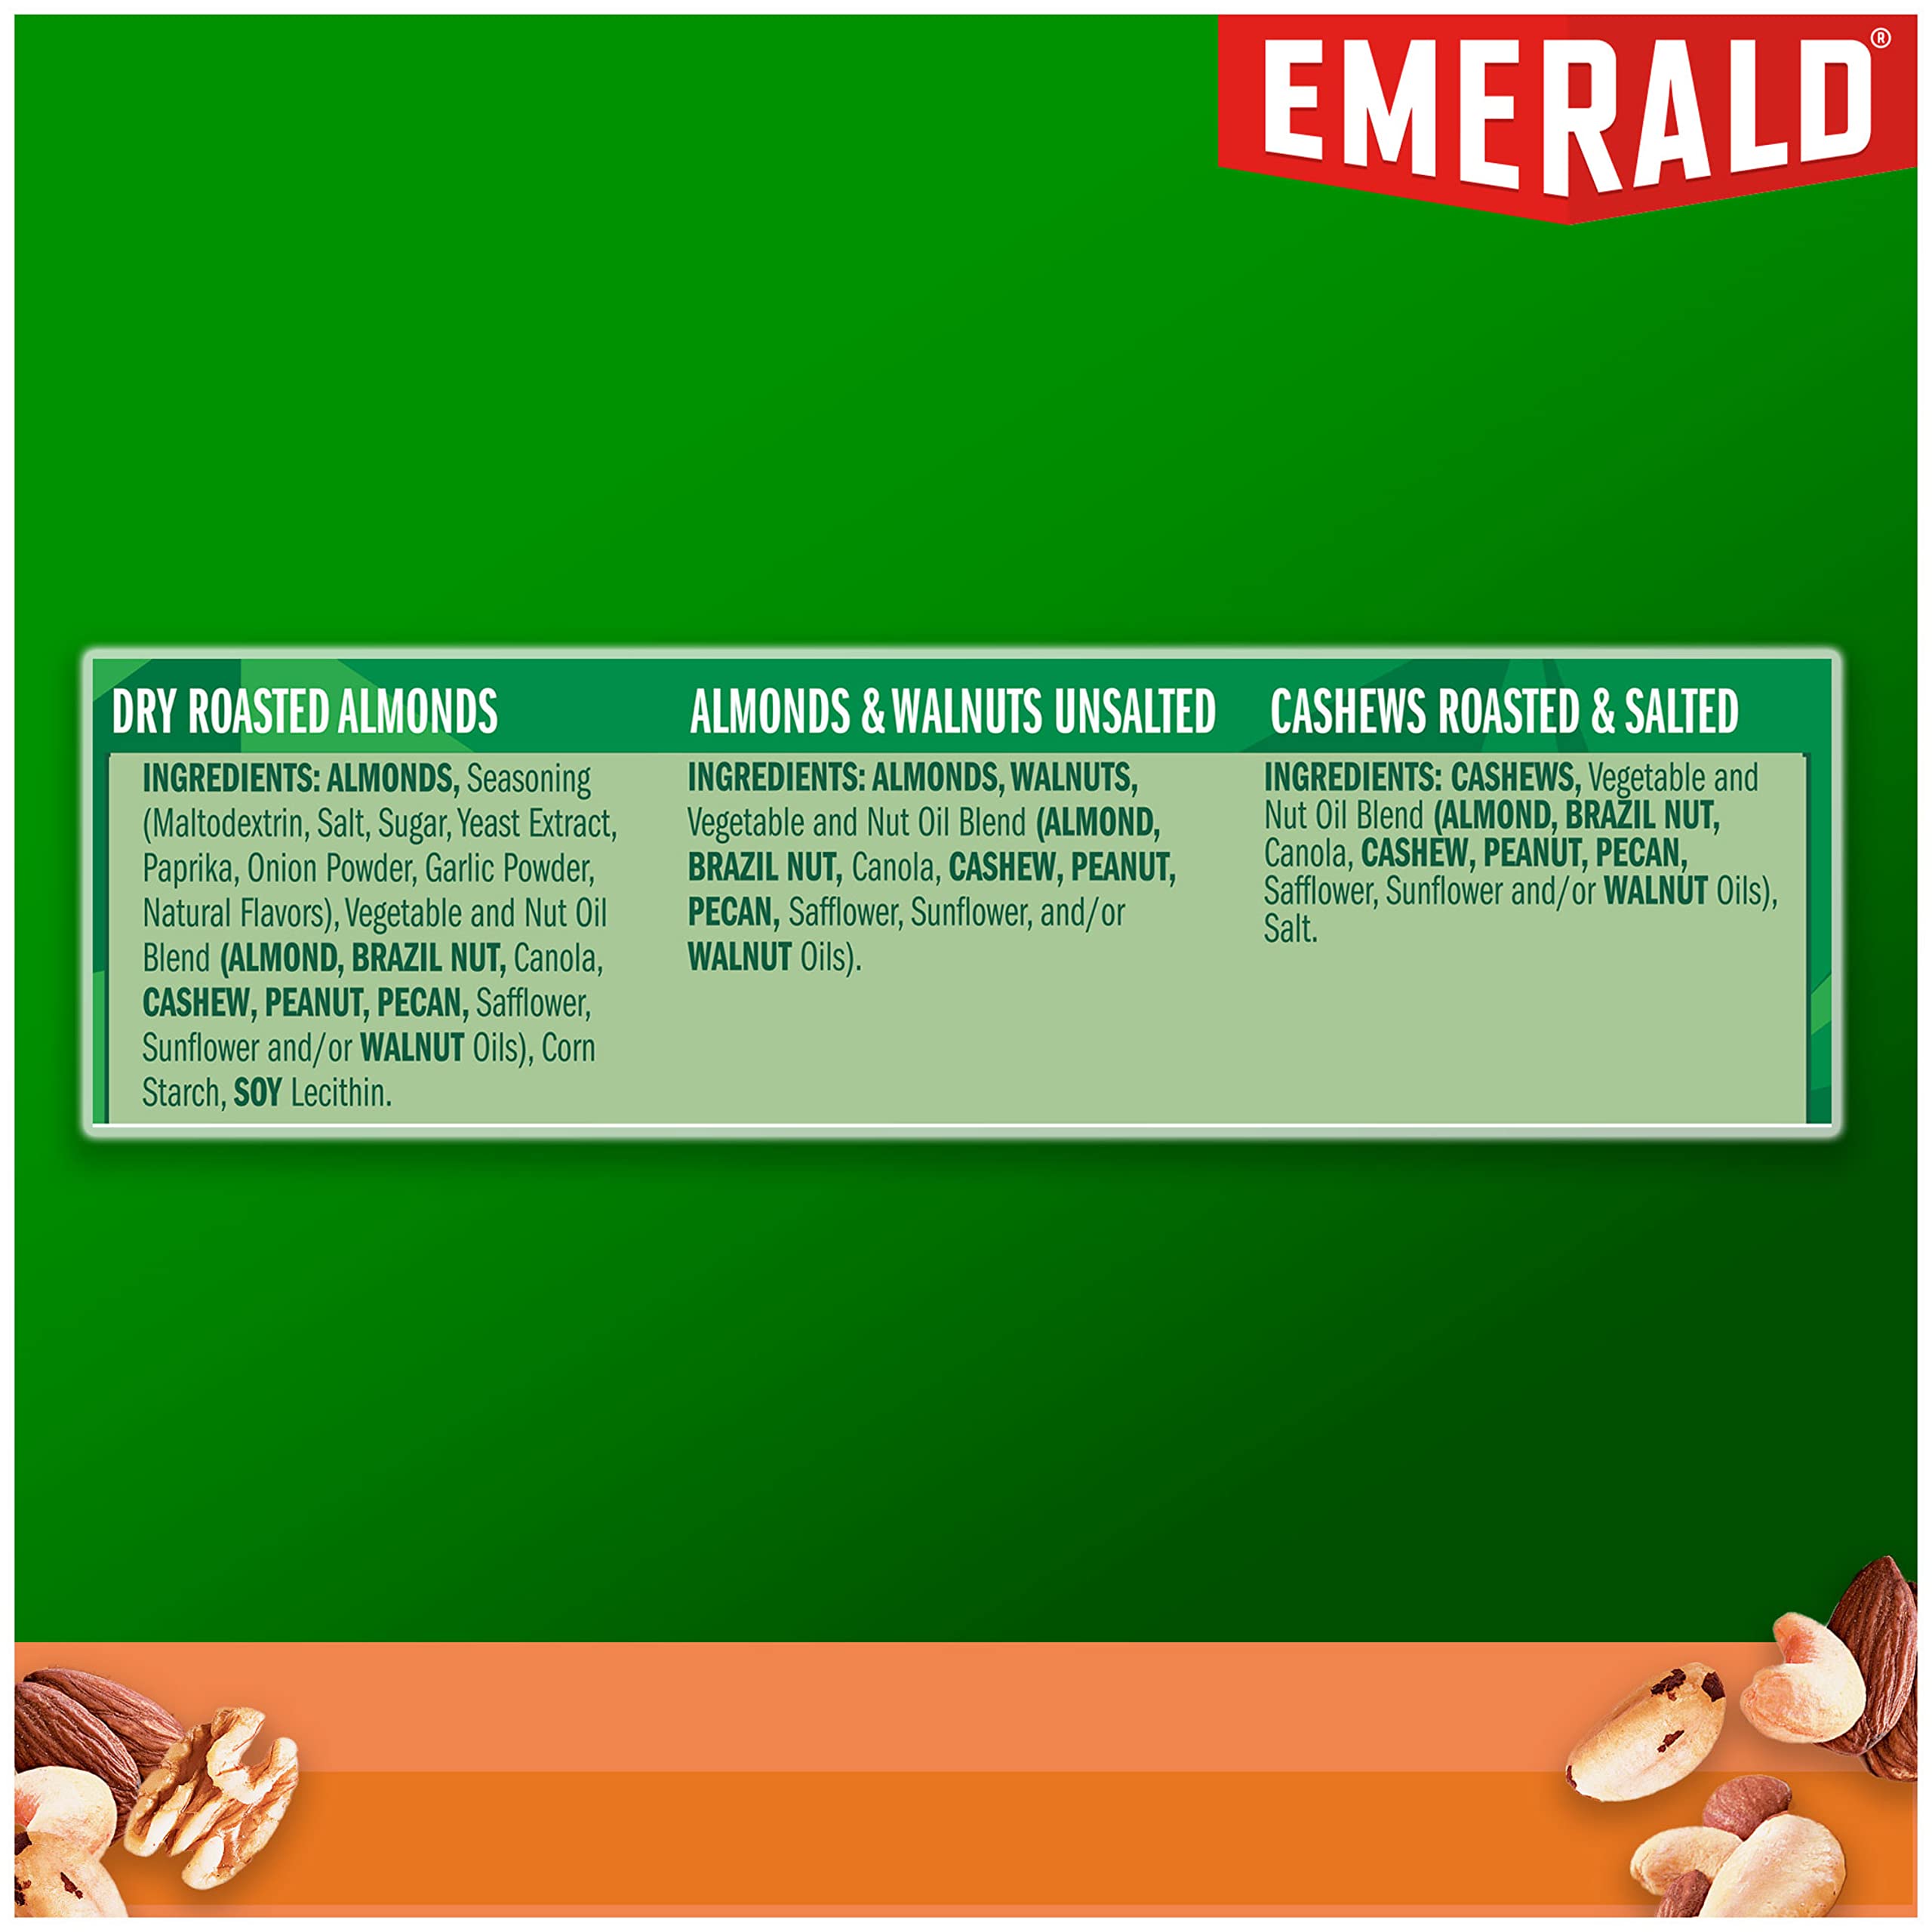 Emerald Nuts, 100 Calorie Variety Pack, 18 Count